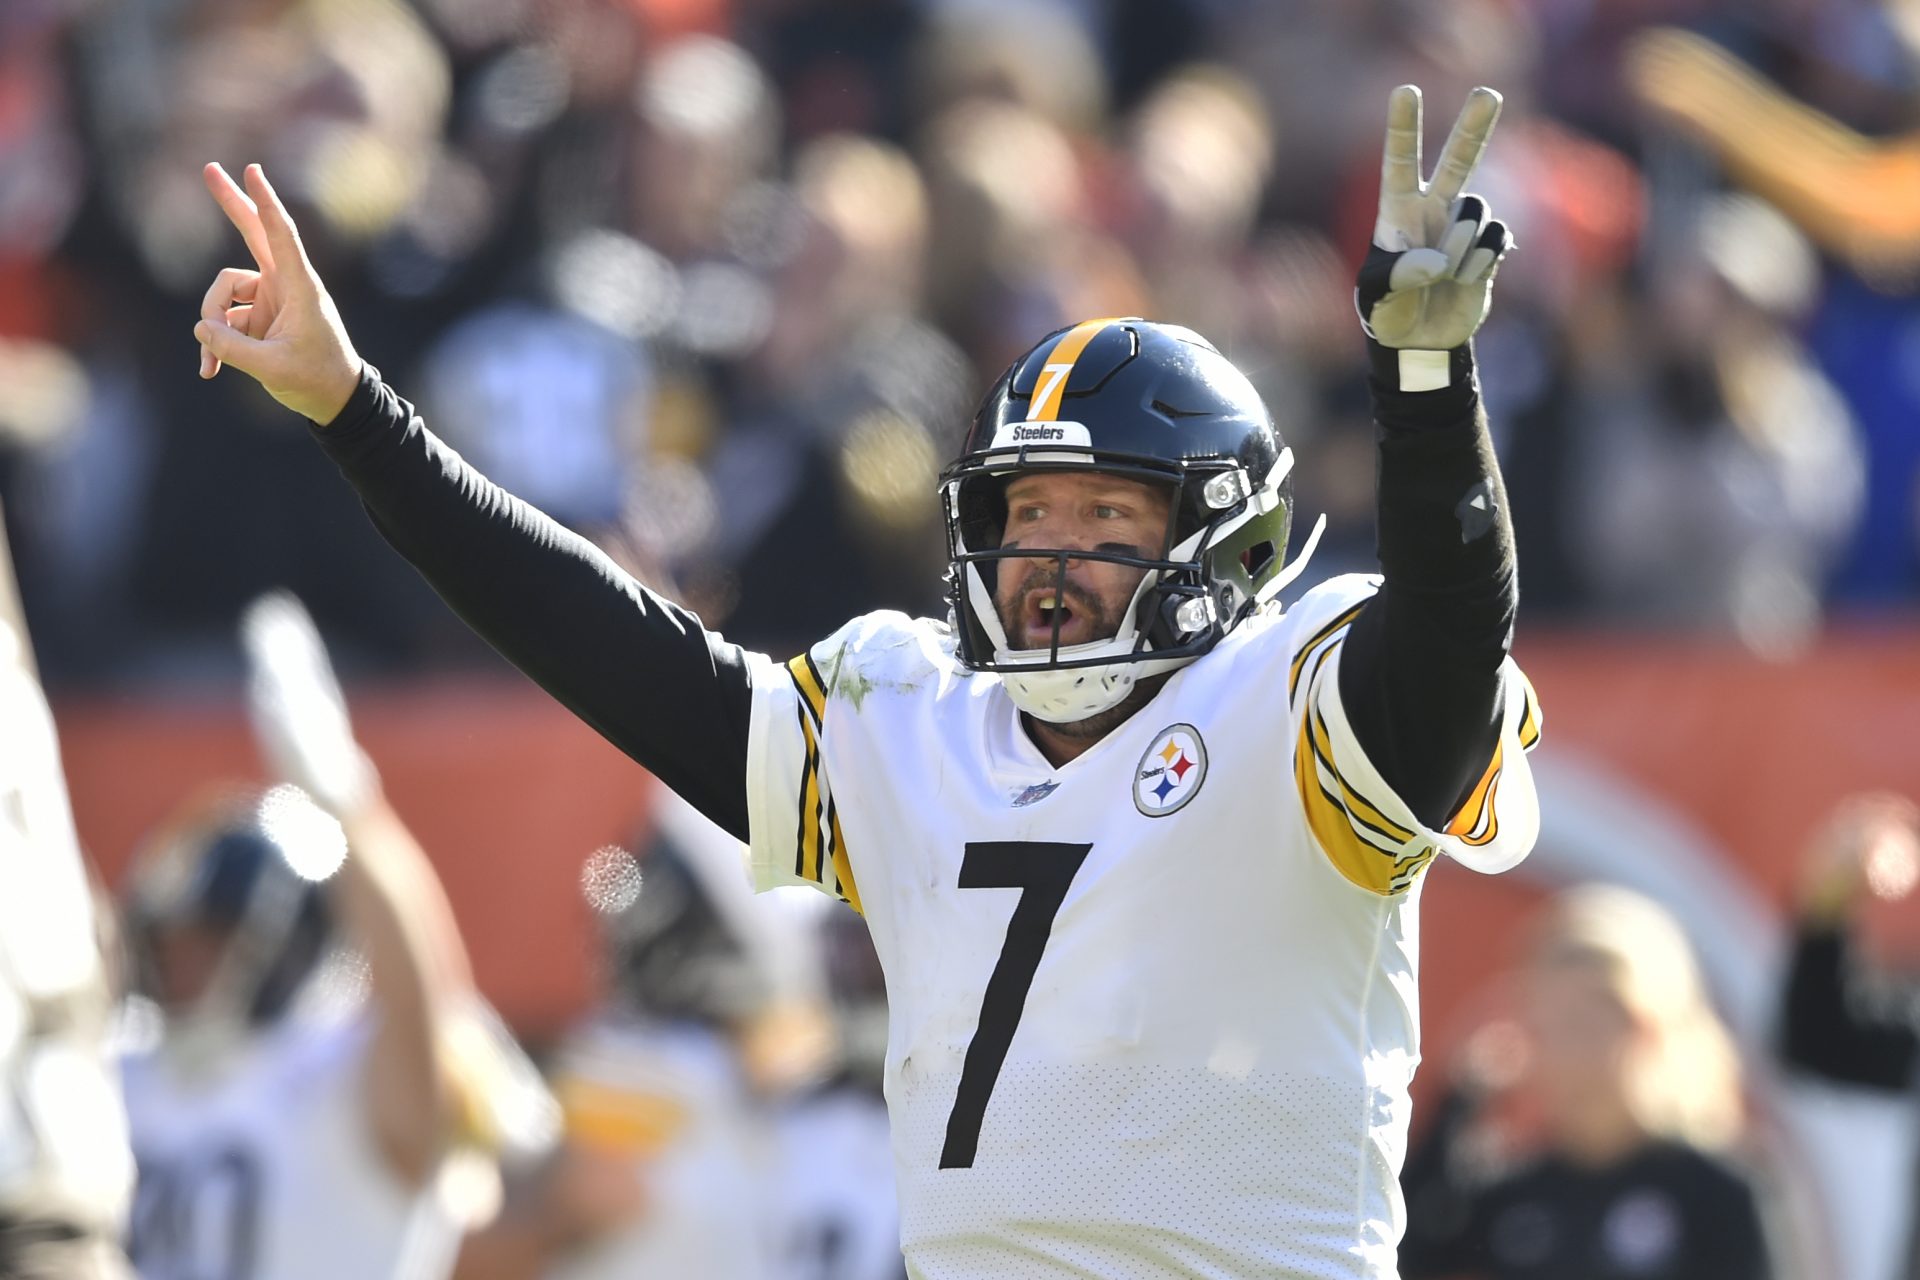 Pittsburgh Steelers quarterback Ben Roethlisberger celebrates after a 2-yard touchdown pass to tight end Pat Freiermuth (88) during the second half of an NFL football game against the Cleveland Browns, Sunday, Oct. 31, 2021, in Cleveland.